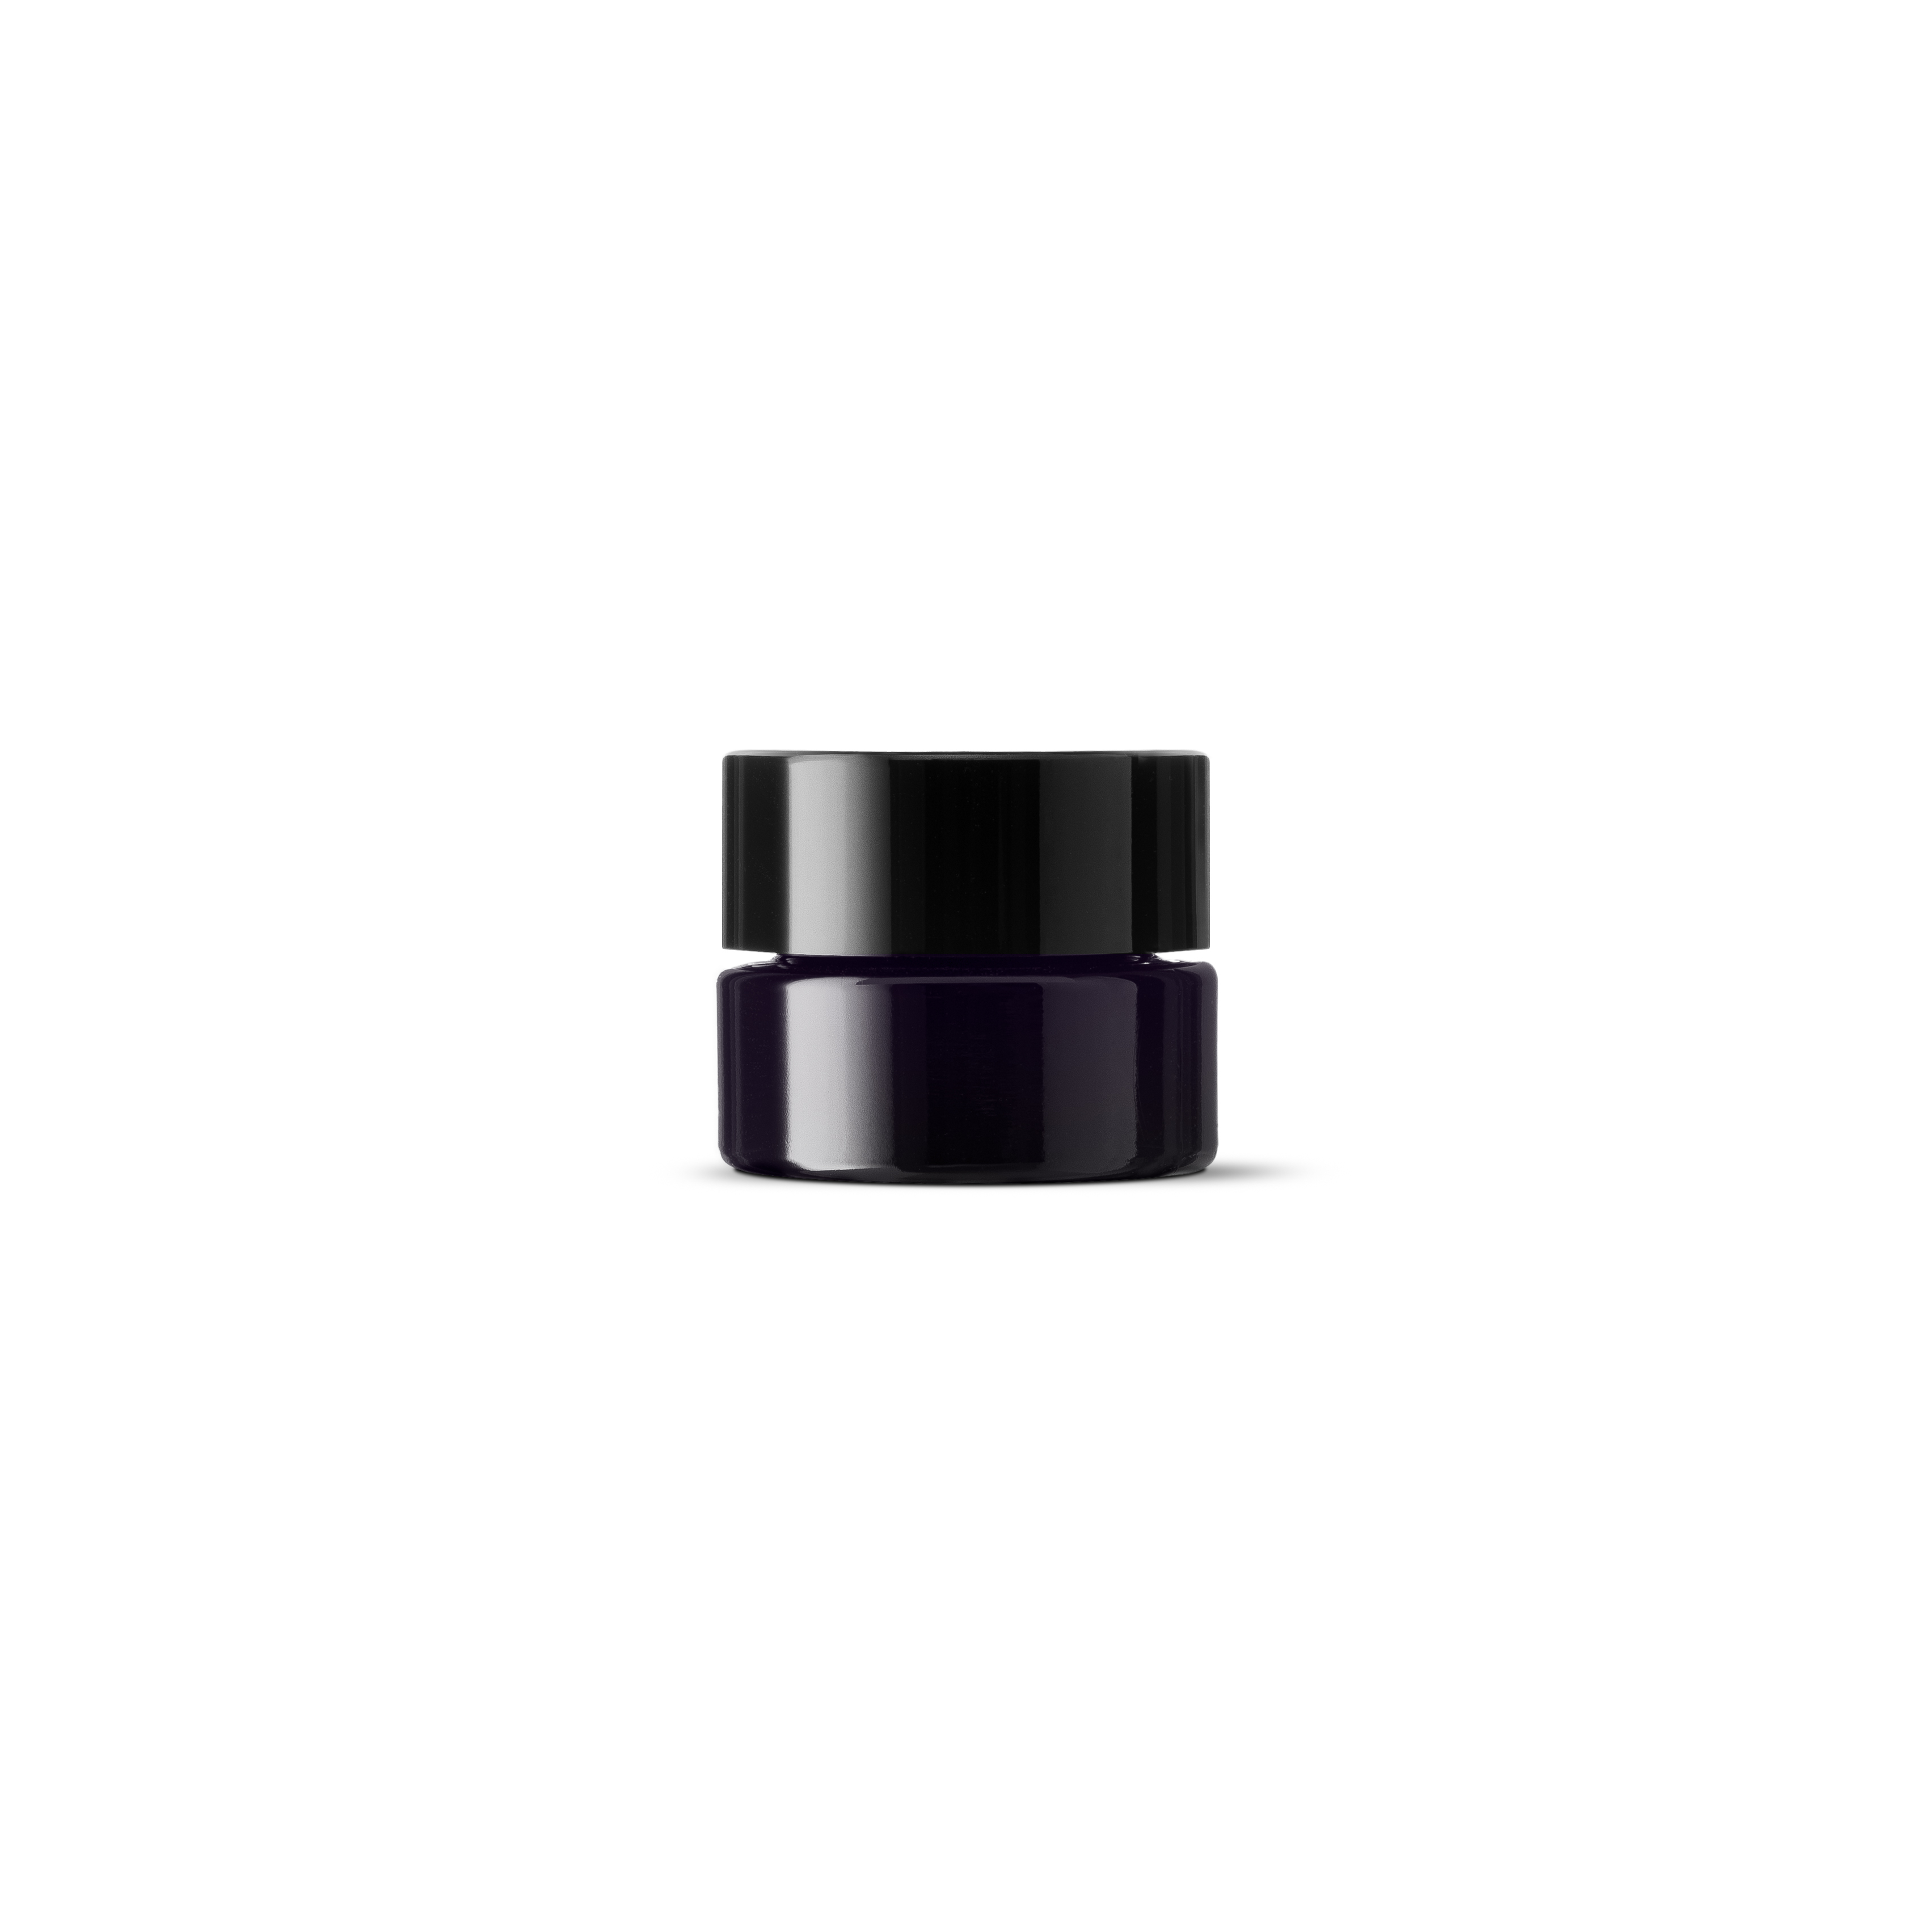 Cosmetic jar Eris 15 ml, 35 special thread, fit for child-resistant lid, Miron